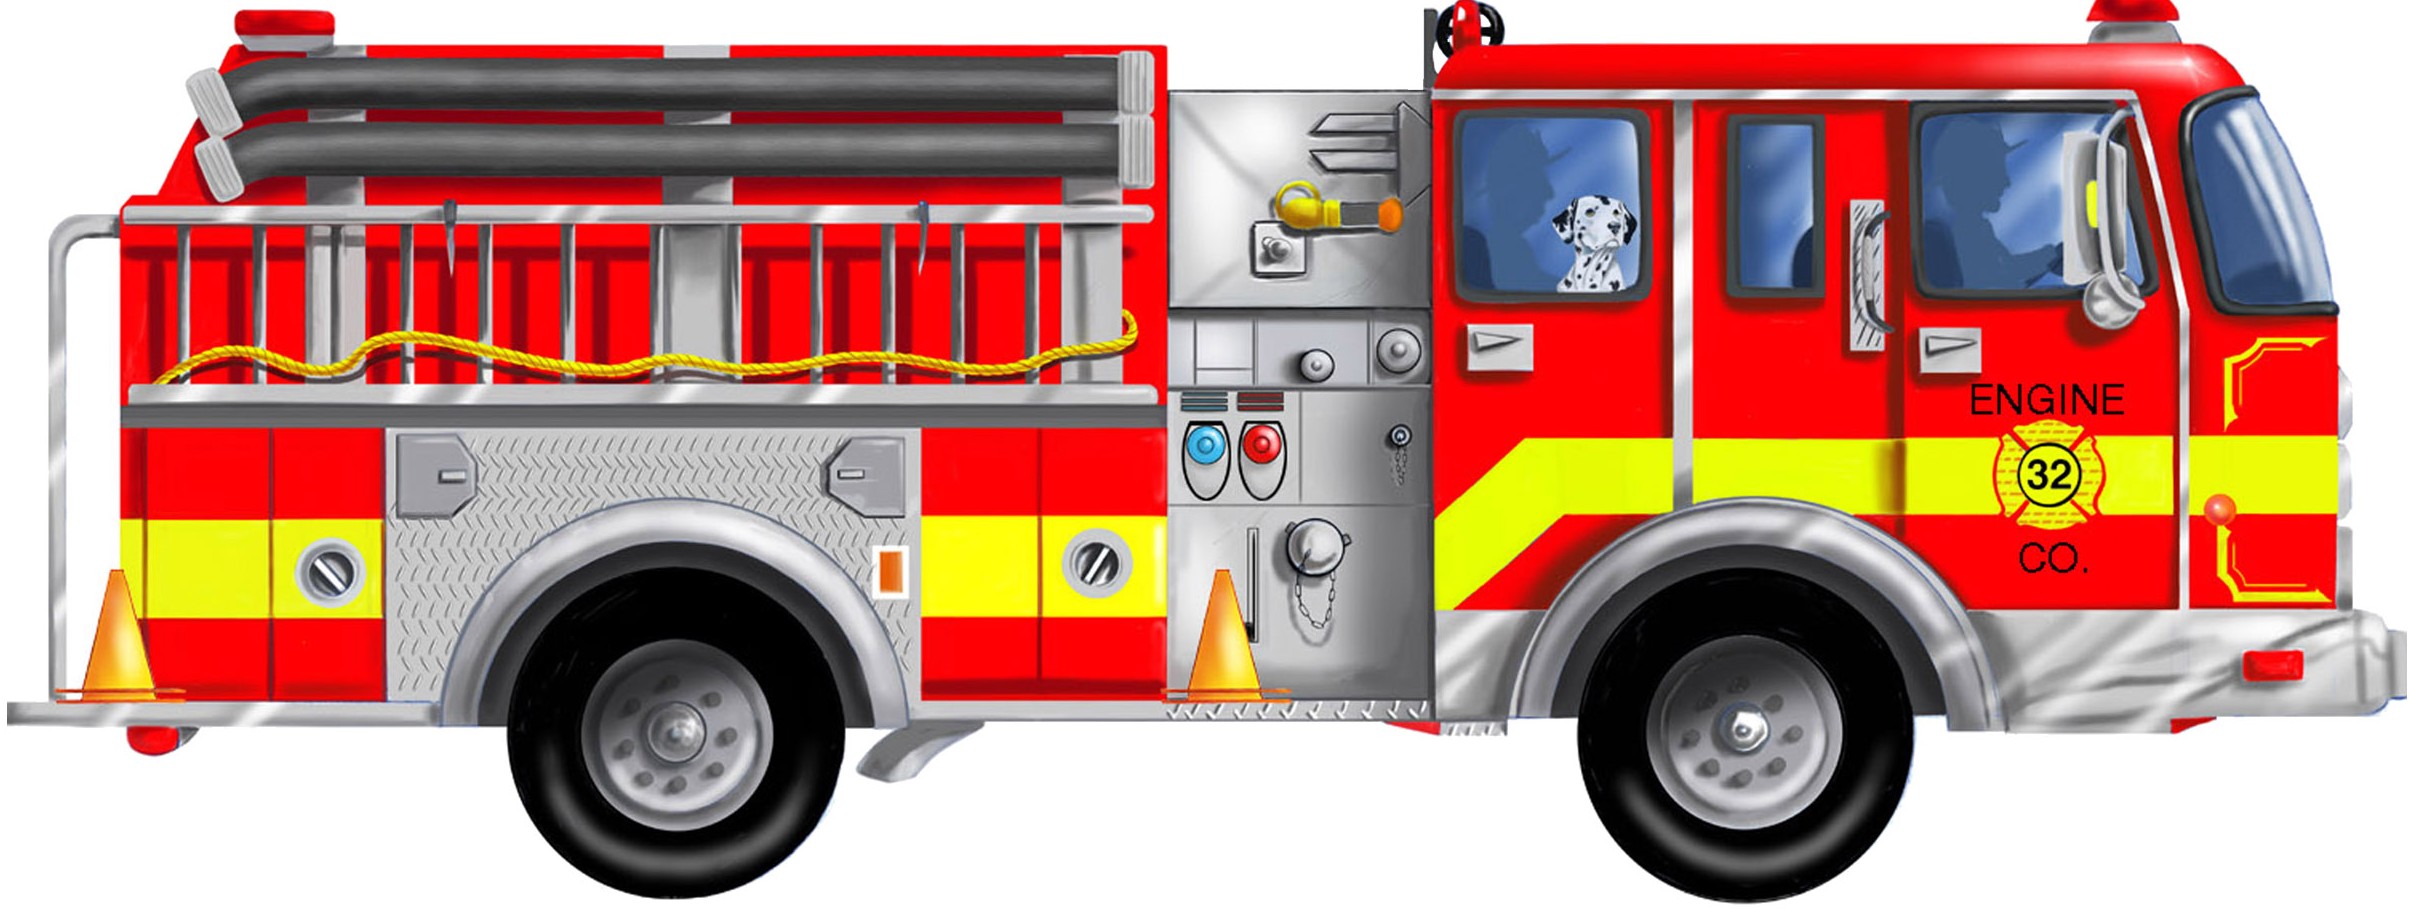 Free Fire Truck Clip Art Pictures.